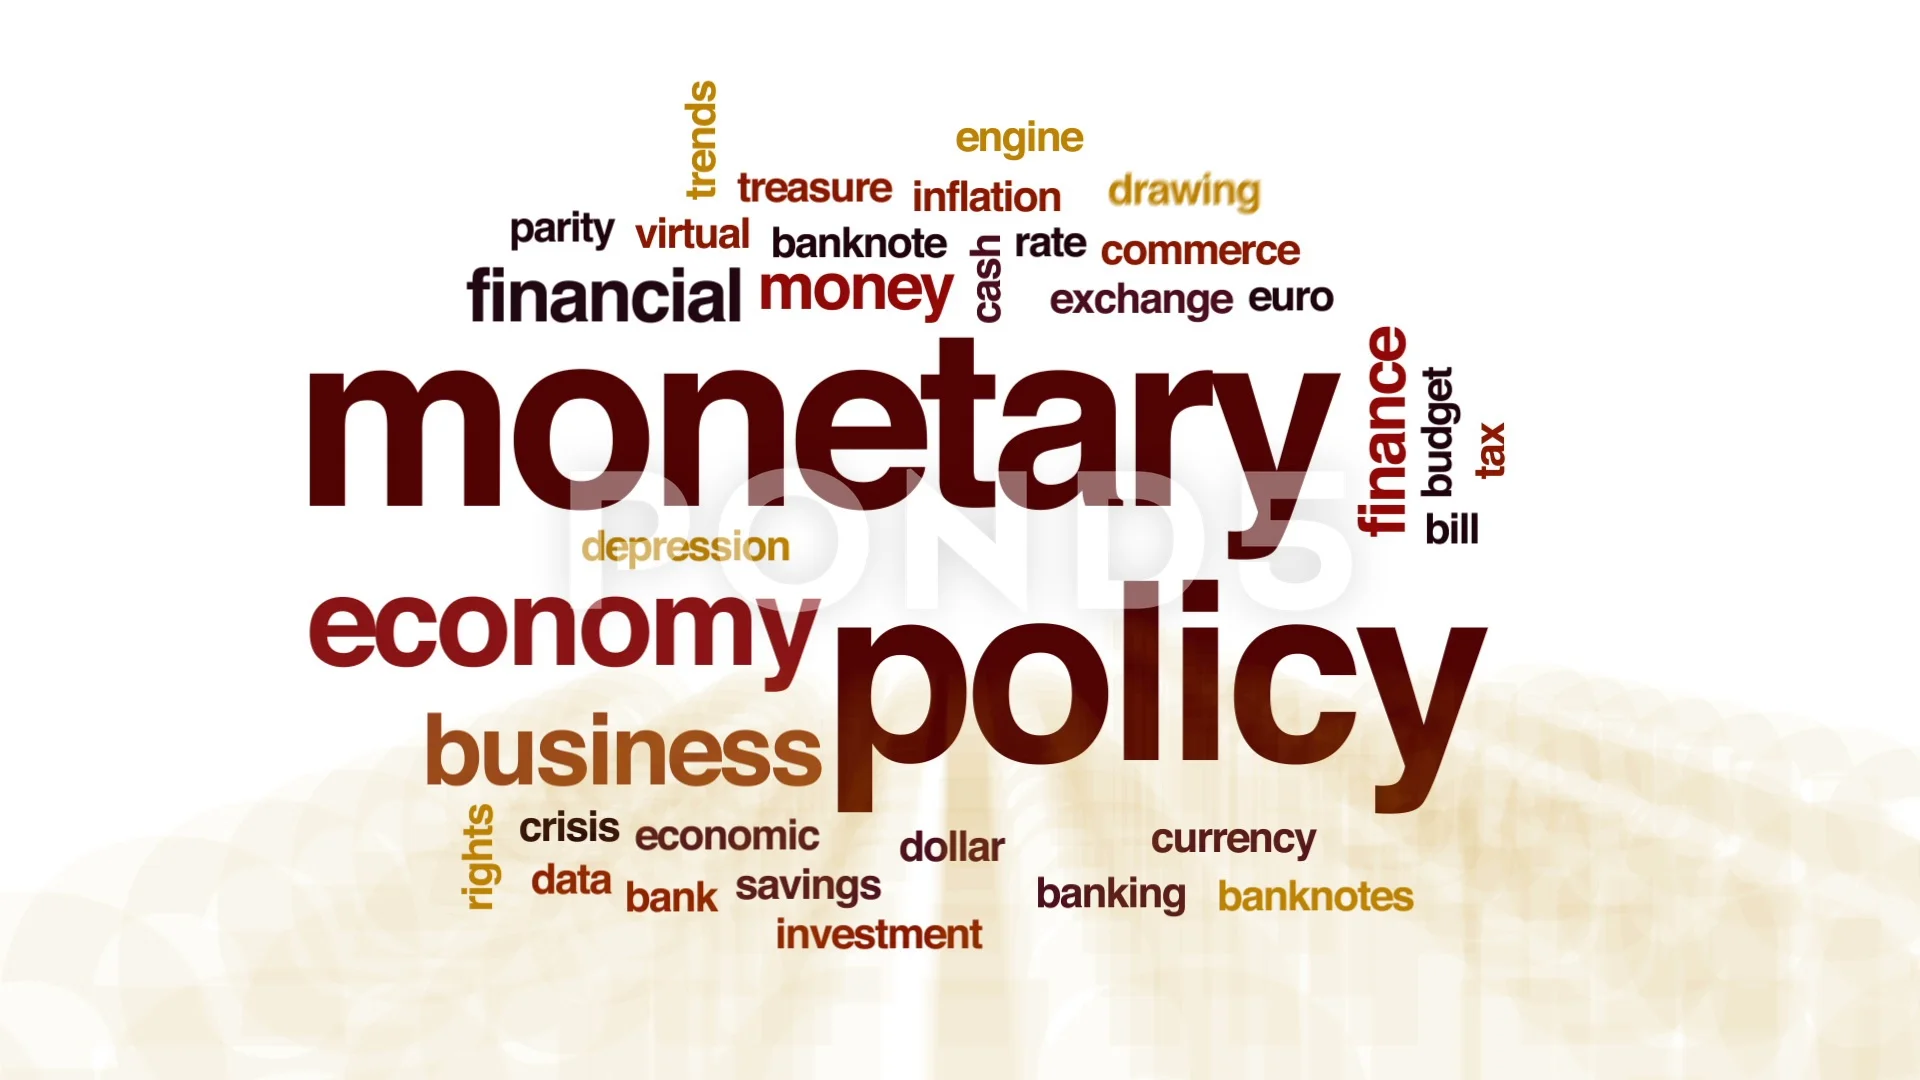 Monetary policy animated word cloud, tex... | Stock Video | Pond5